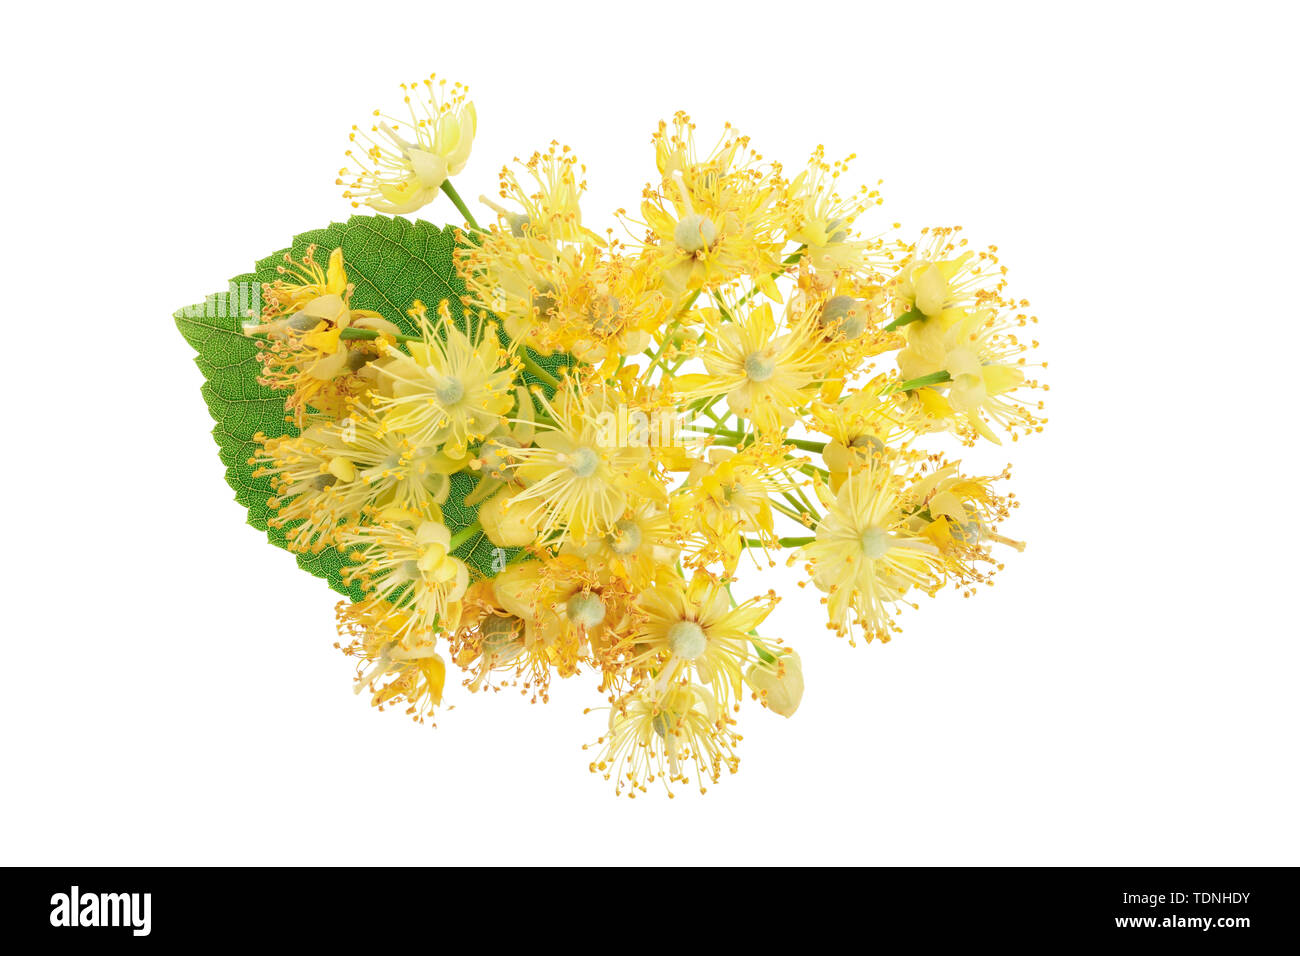 Linden flowers with leaf isolated on white background. Stock Photo